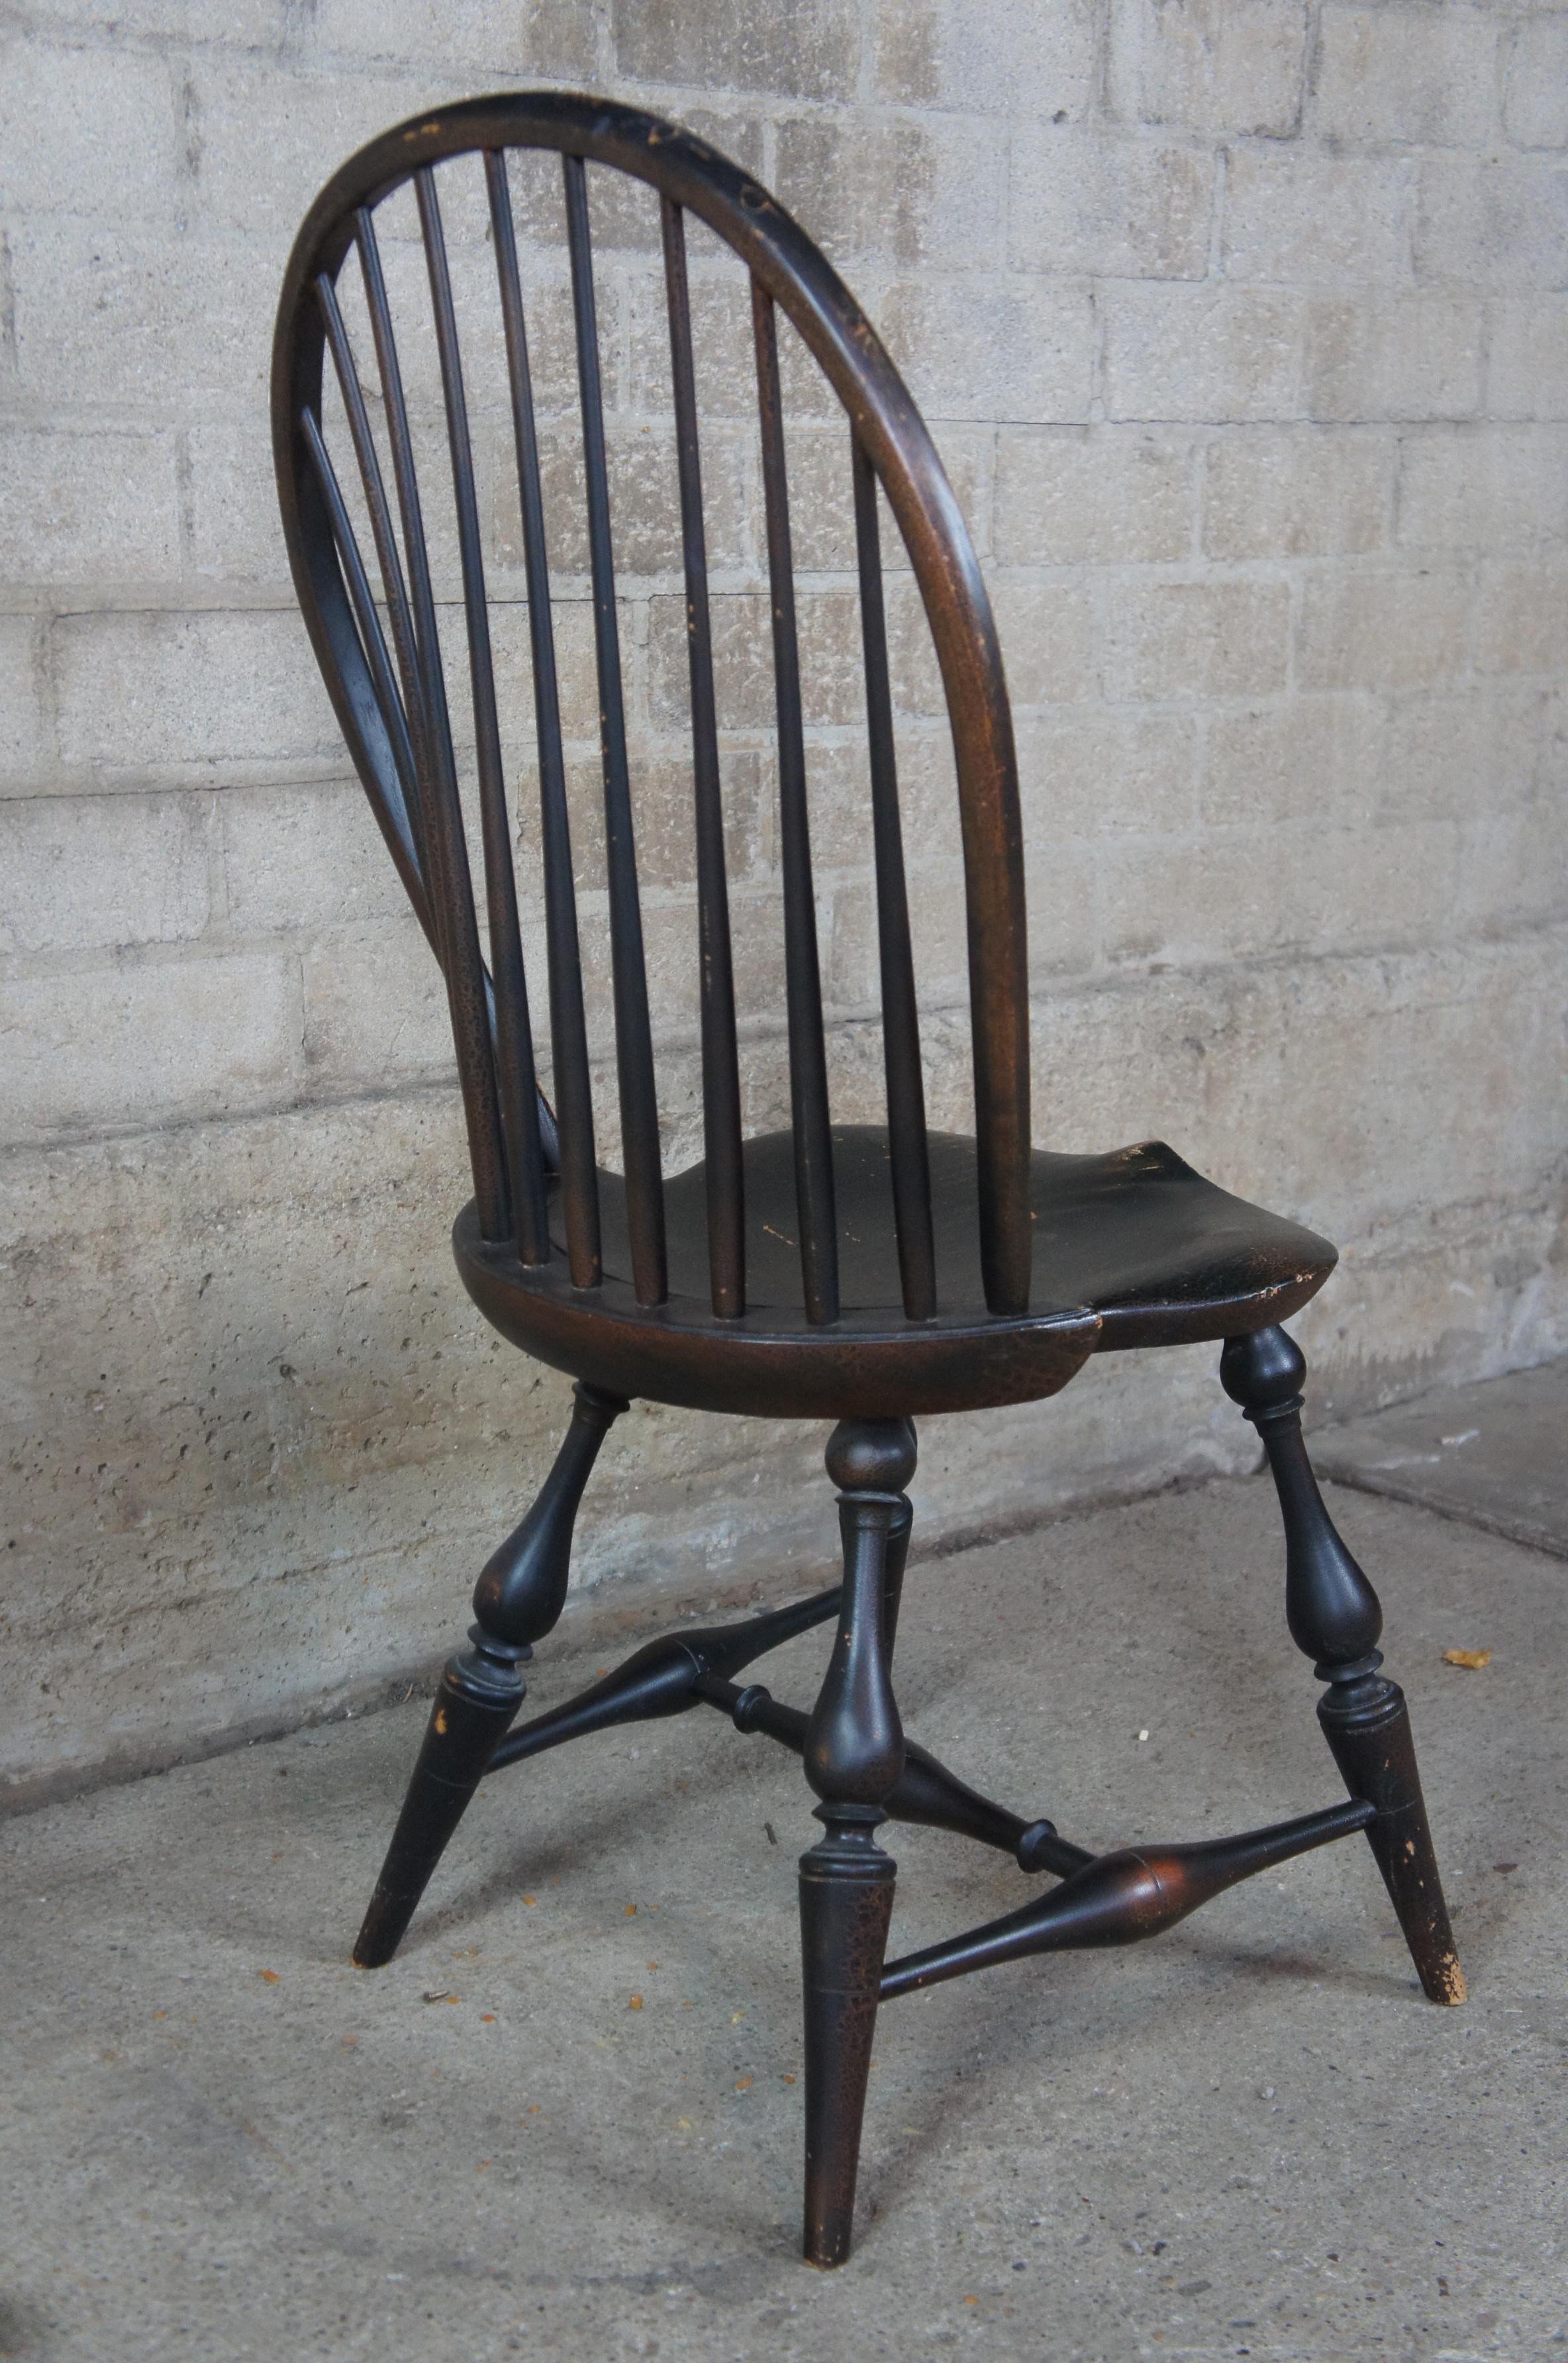 river bend chair company